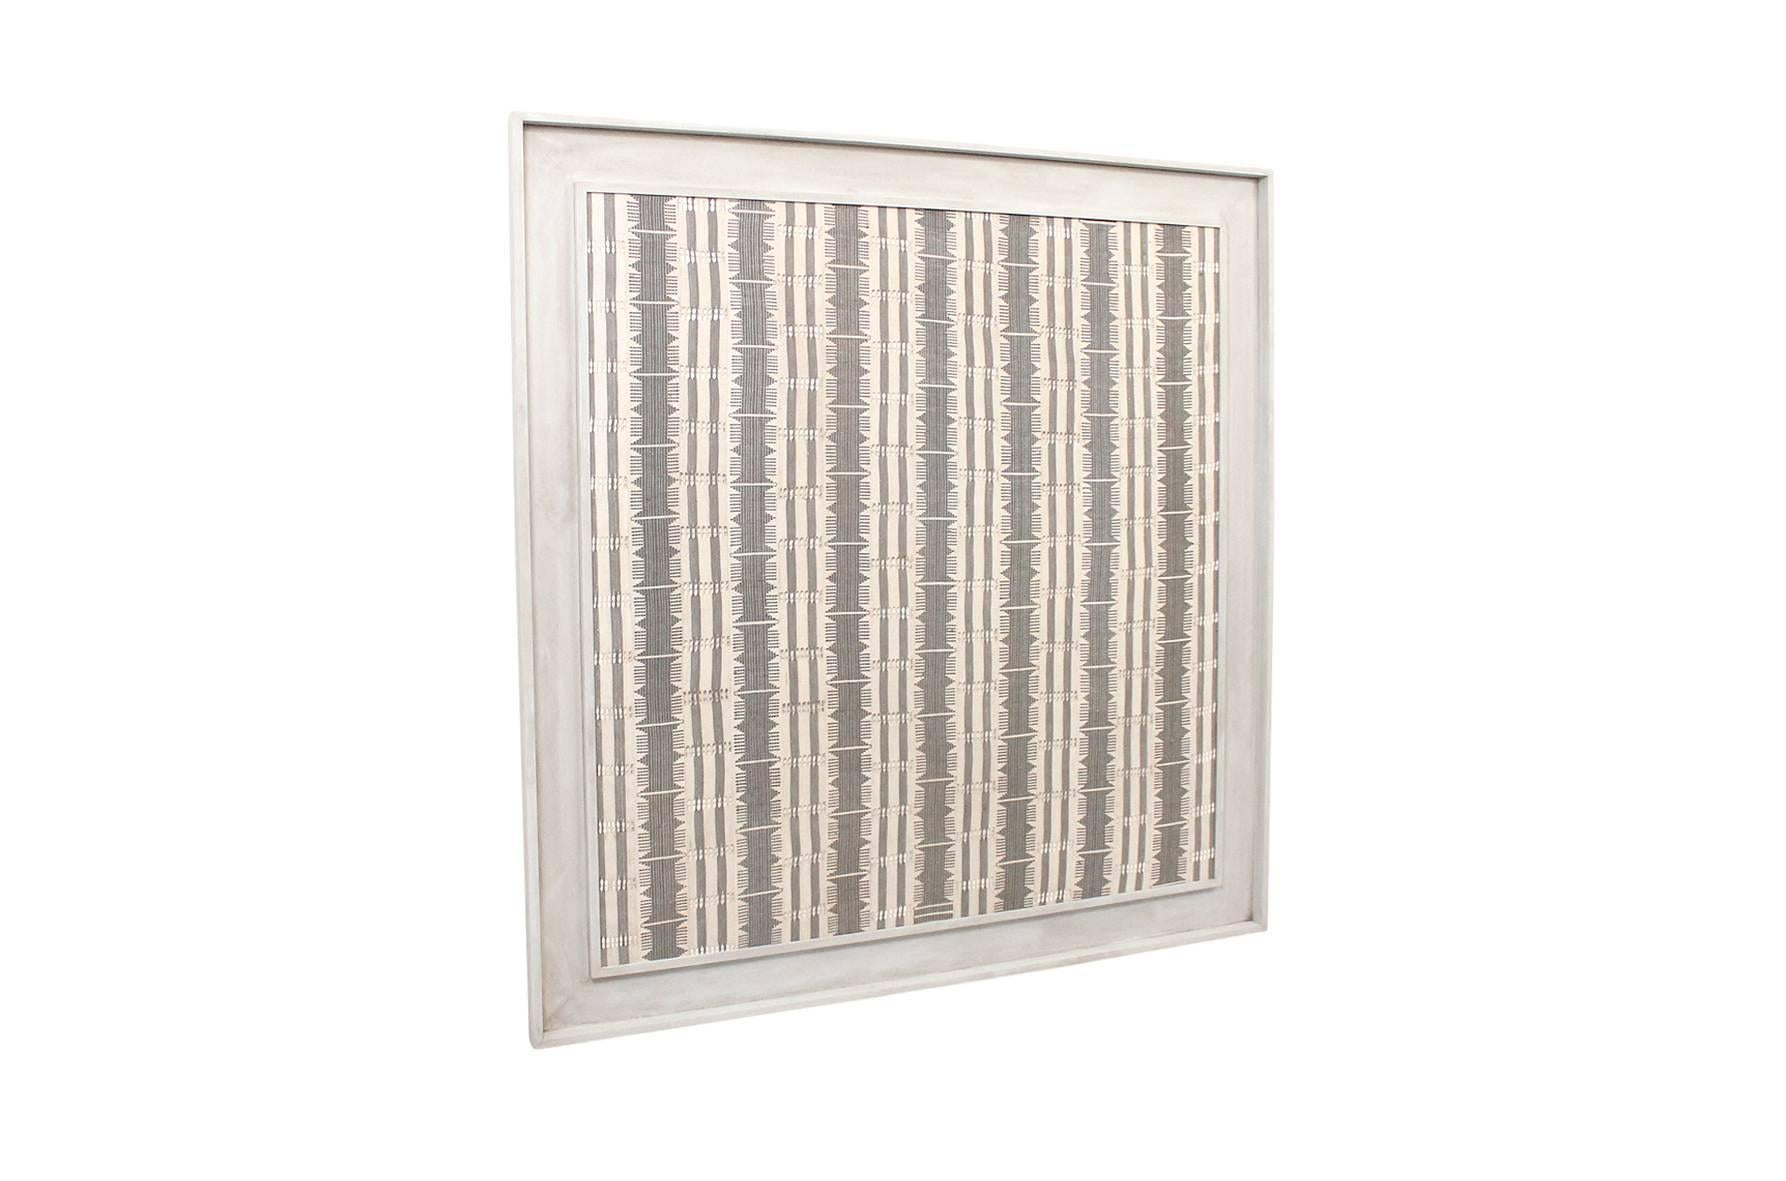 Impressive large-scale modernist textile in custom frame. This woven piece is reminiscent of work by Jack Lenor Larsen and British fibre artist Peter Collingwood.
     